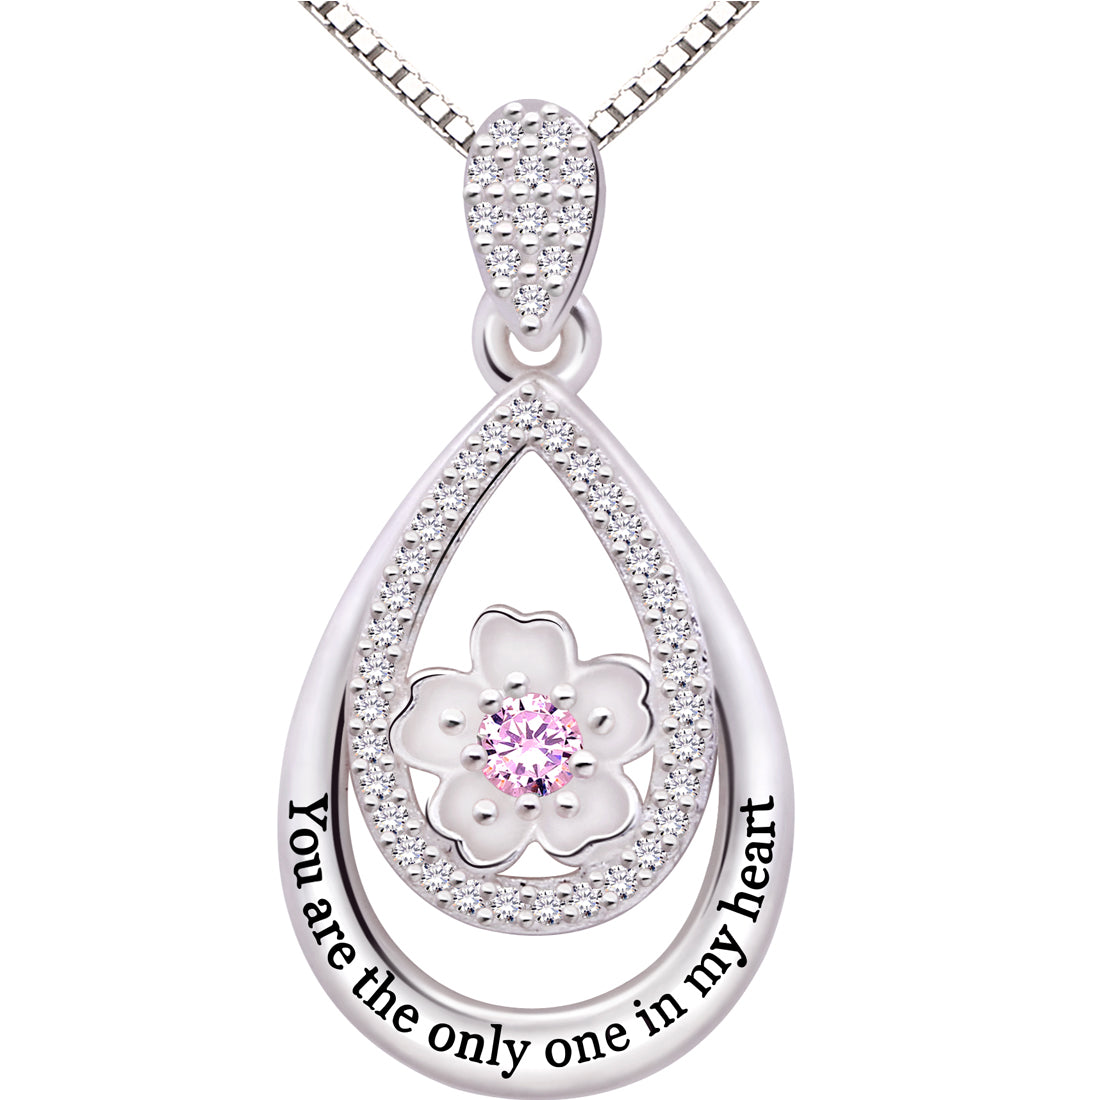 ALOV Jewelry Sterling Silver "You are the only one in my heart" Cubic Zirconia Pendant Necklace